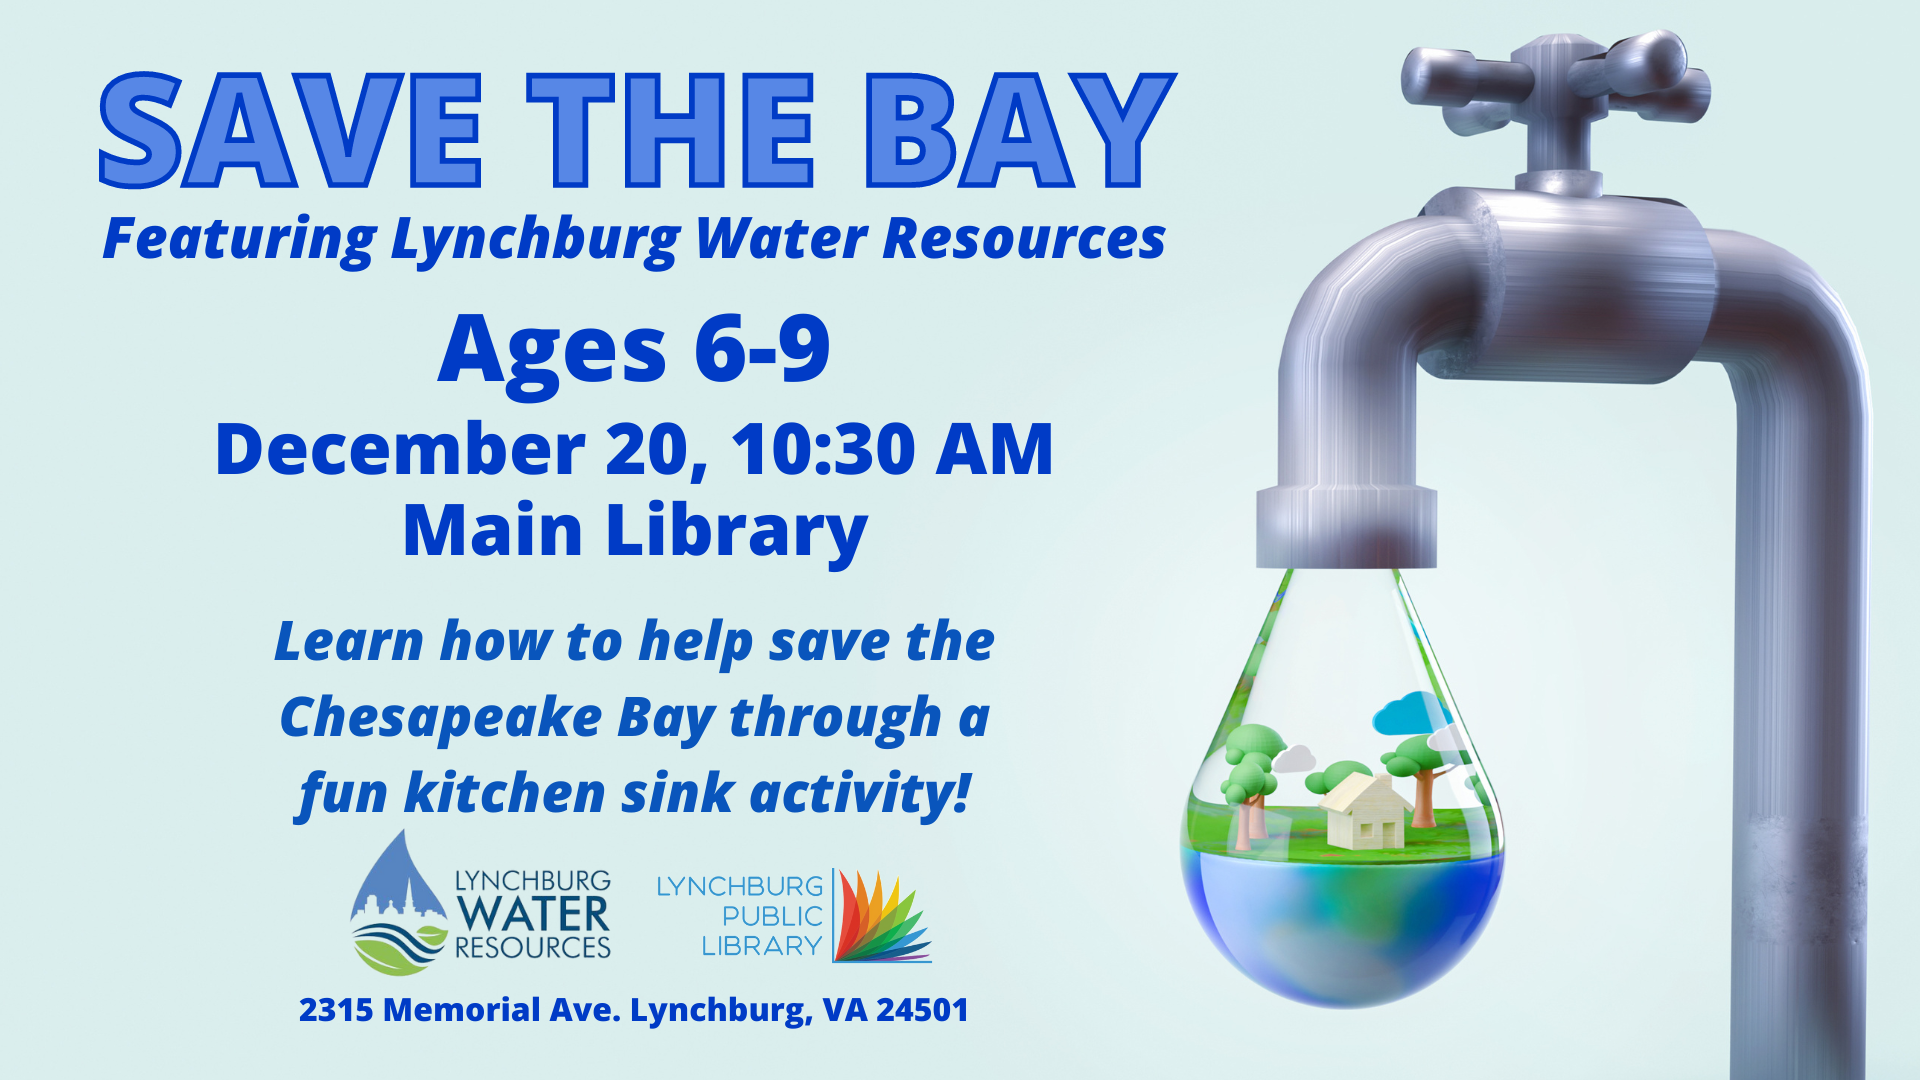 Blue background and blue text. Information about Water Resources at the Library.